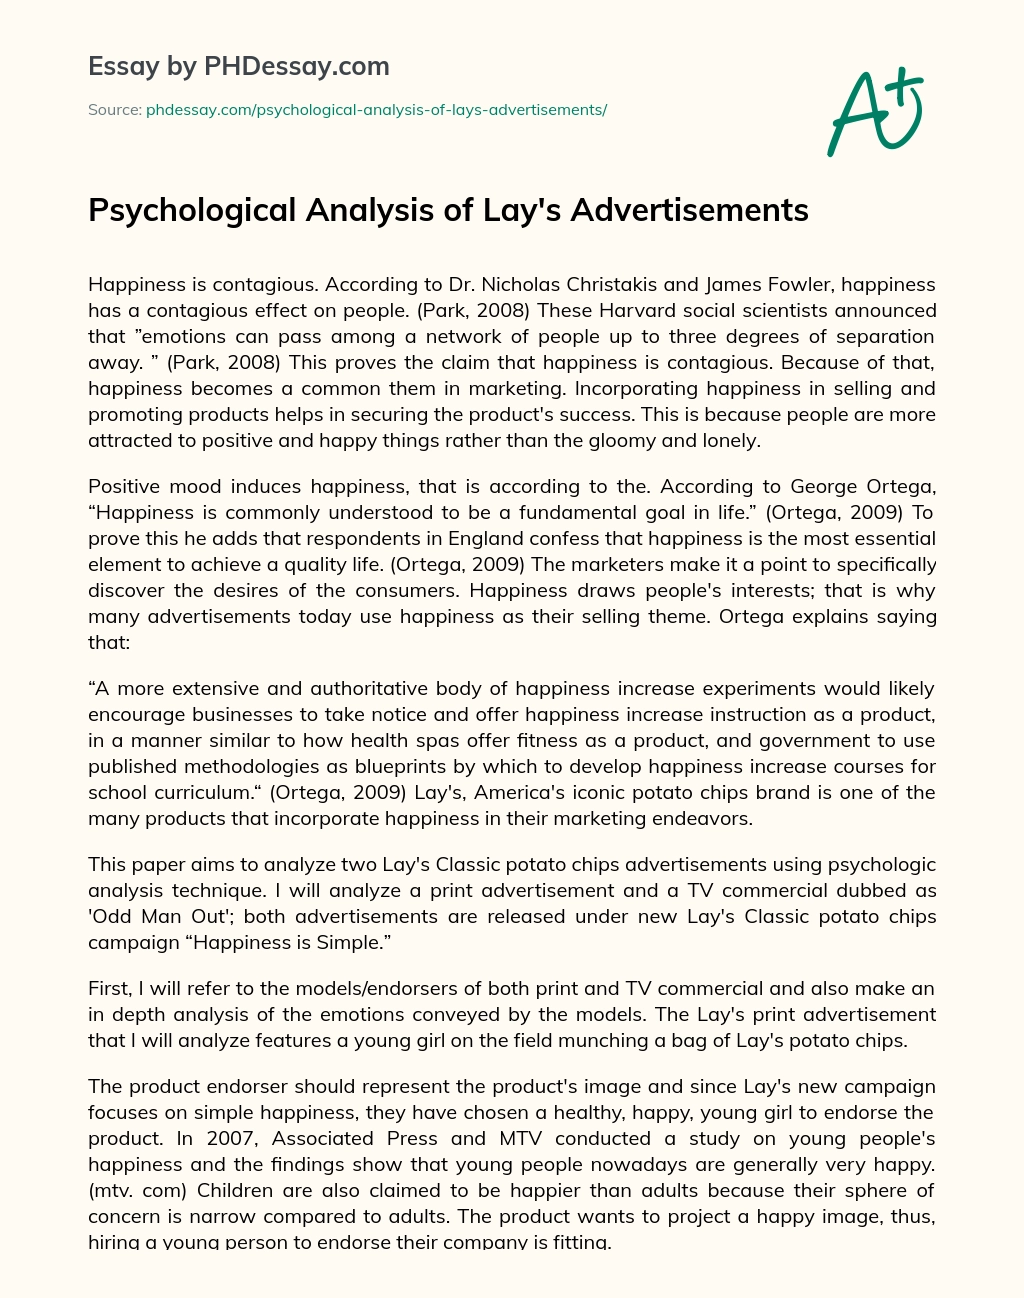 Psychological Analysis of Lay’s Advertisements essay